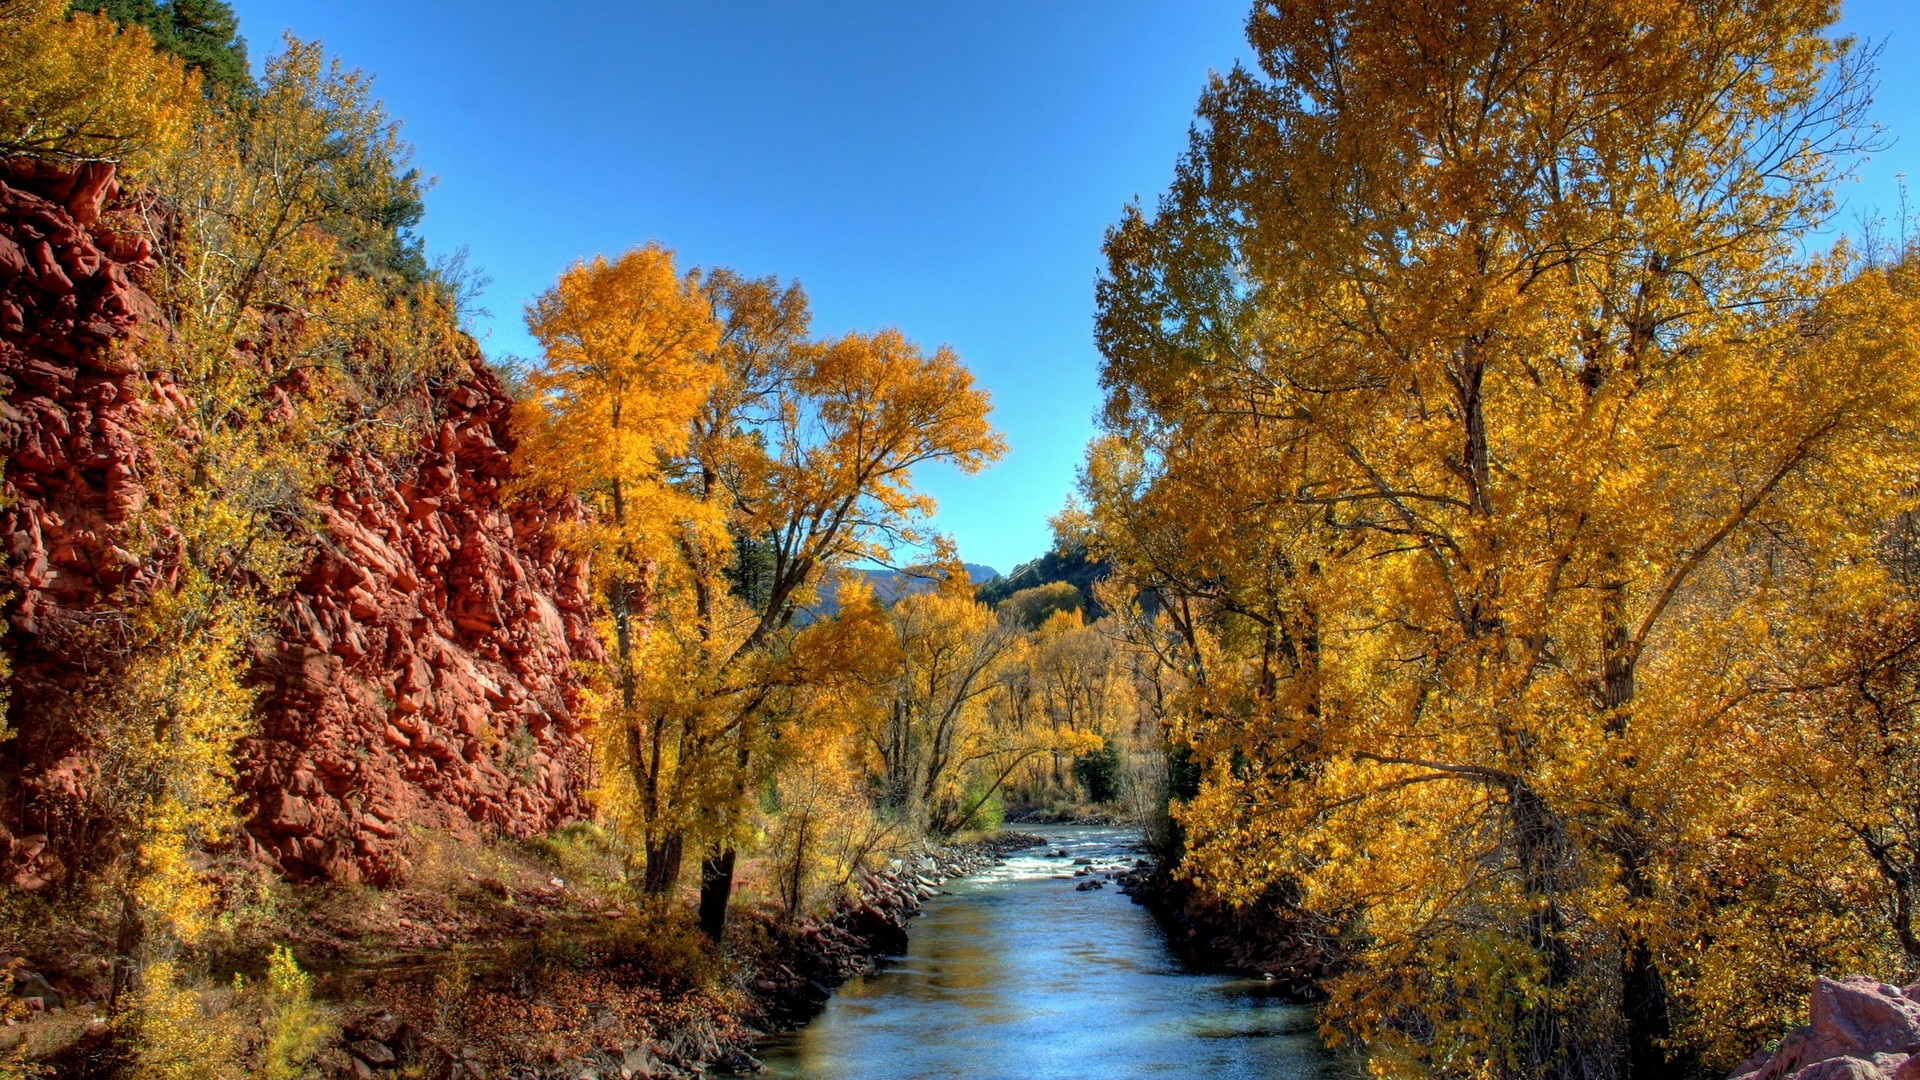 sceneries pictures - The Yellow Trees and Blue River, Red and Tough Hills, What a Natural Scene! 1920X1080 free wallpaper download